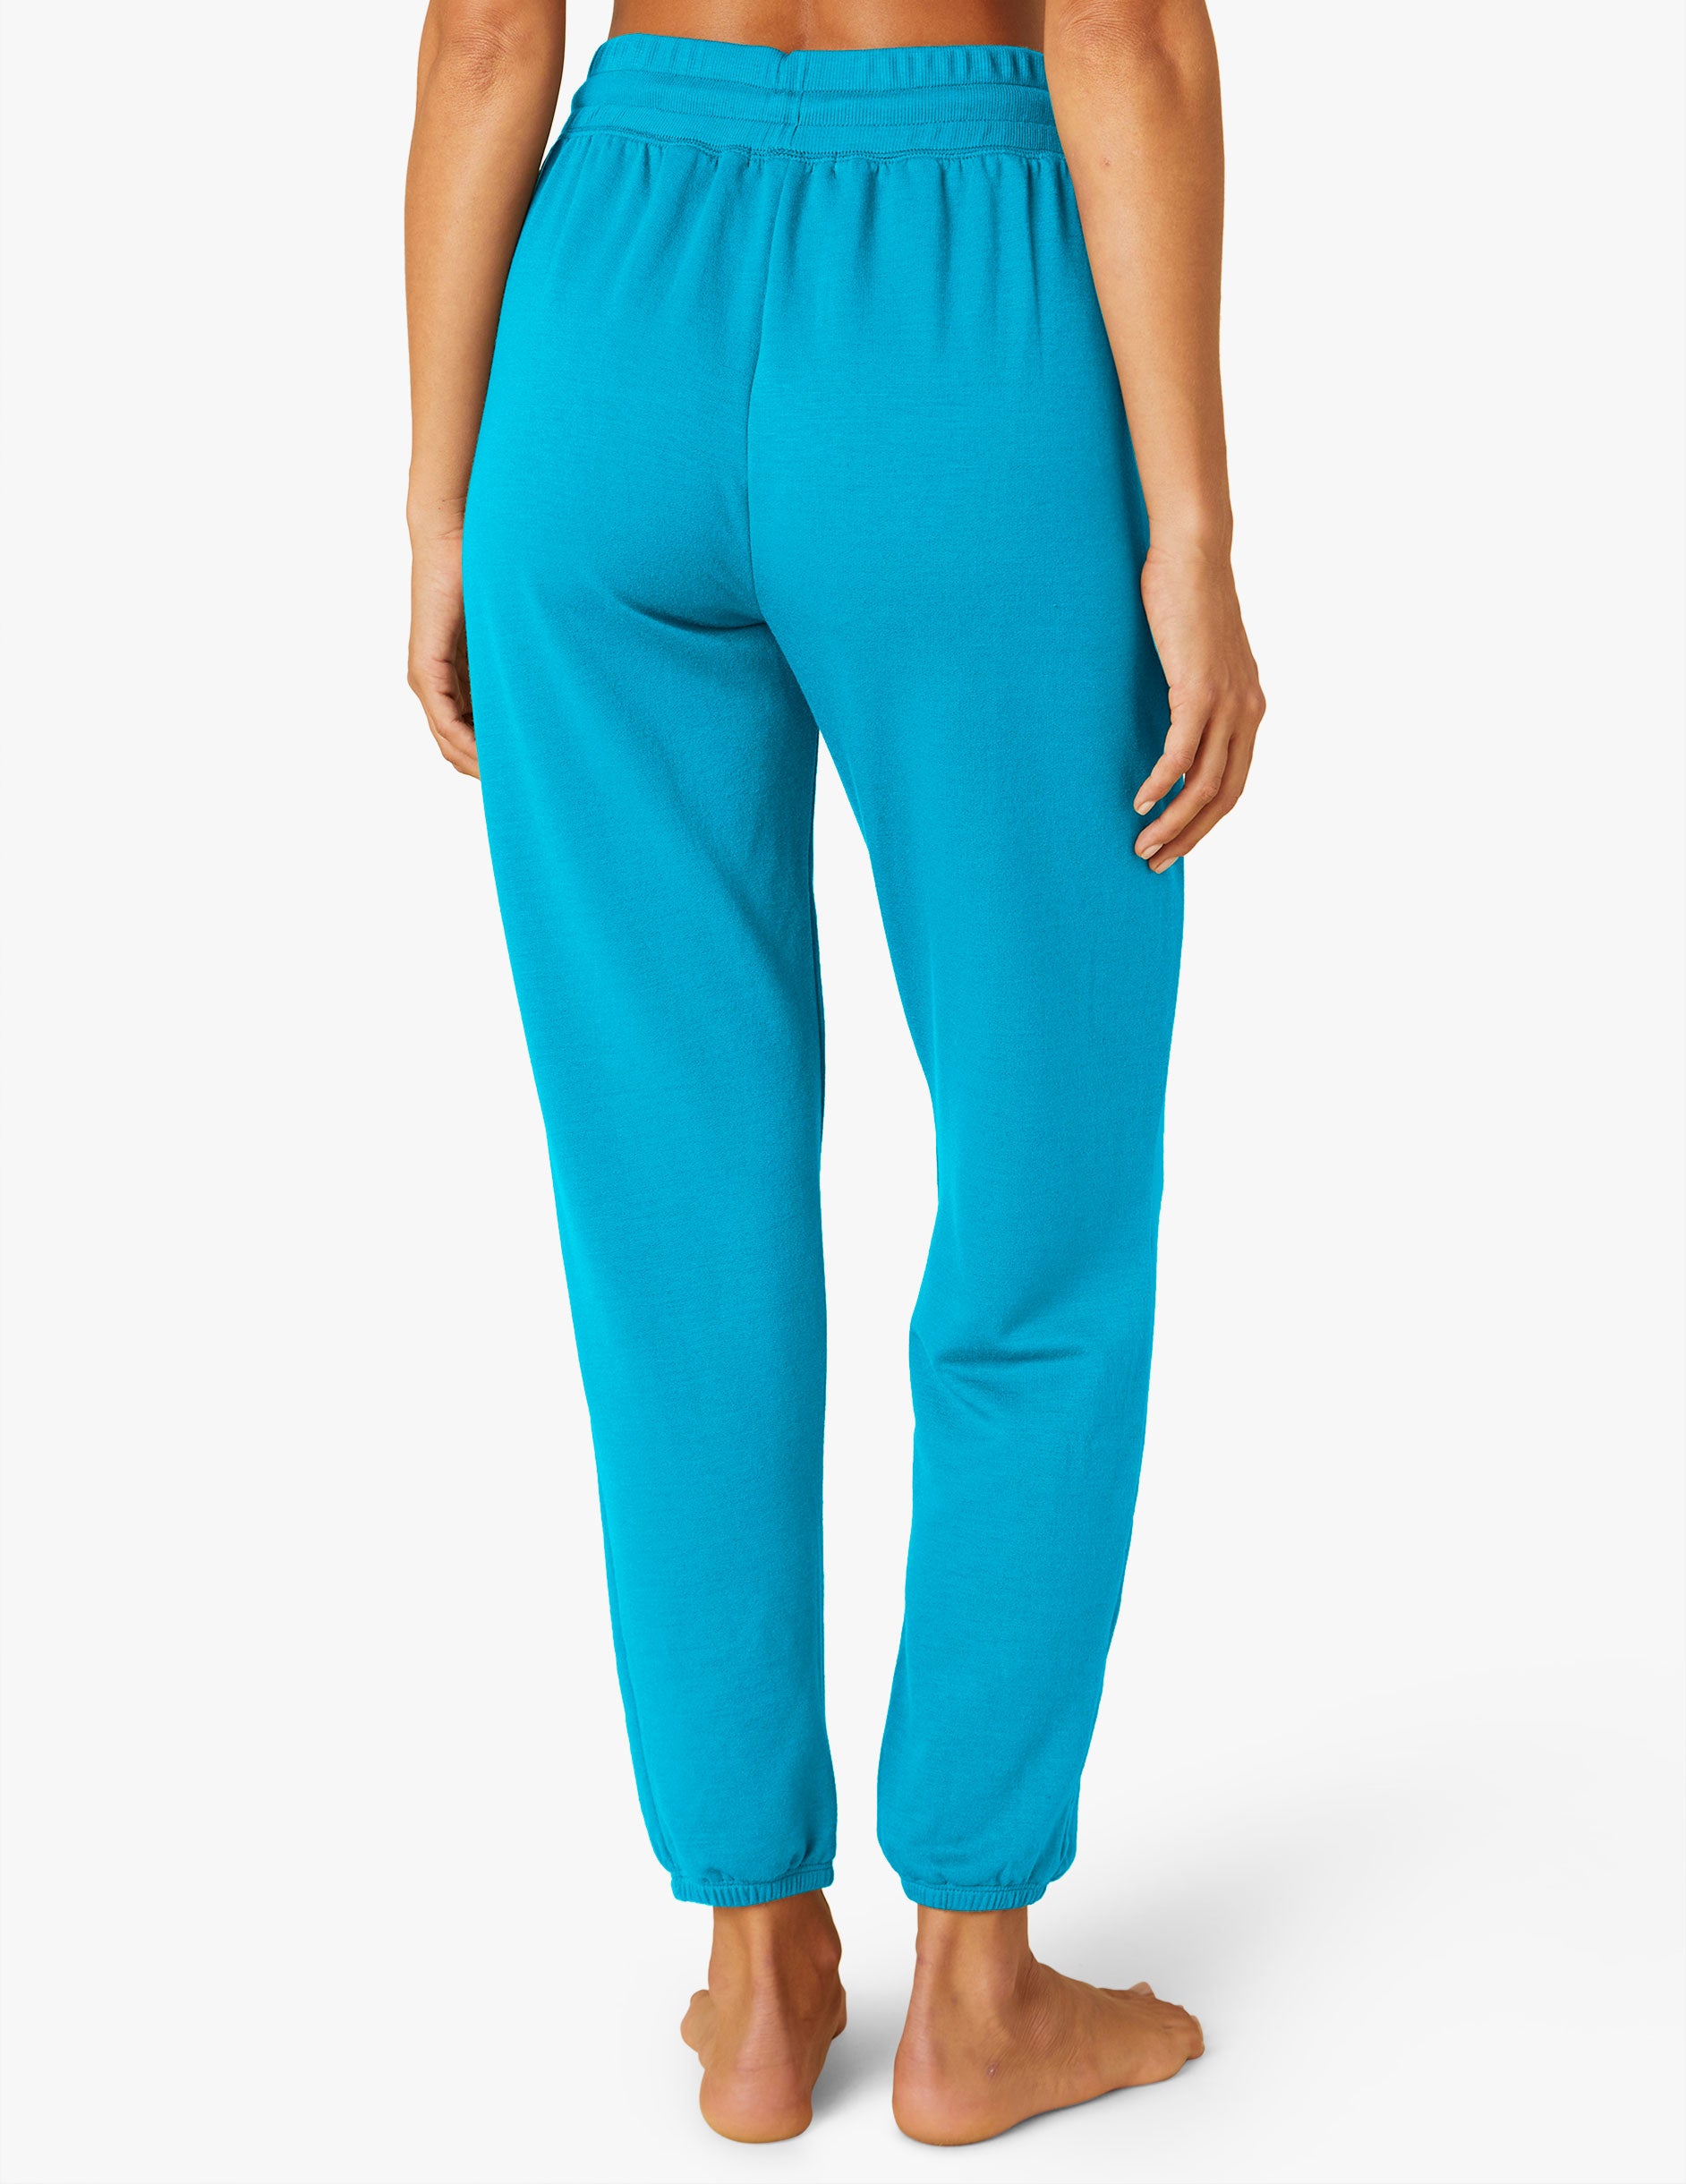 blue sweatpant with drawstring at waist